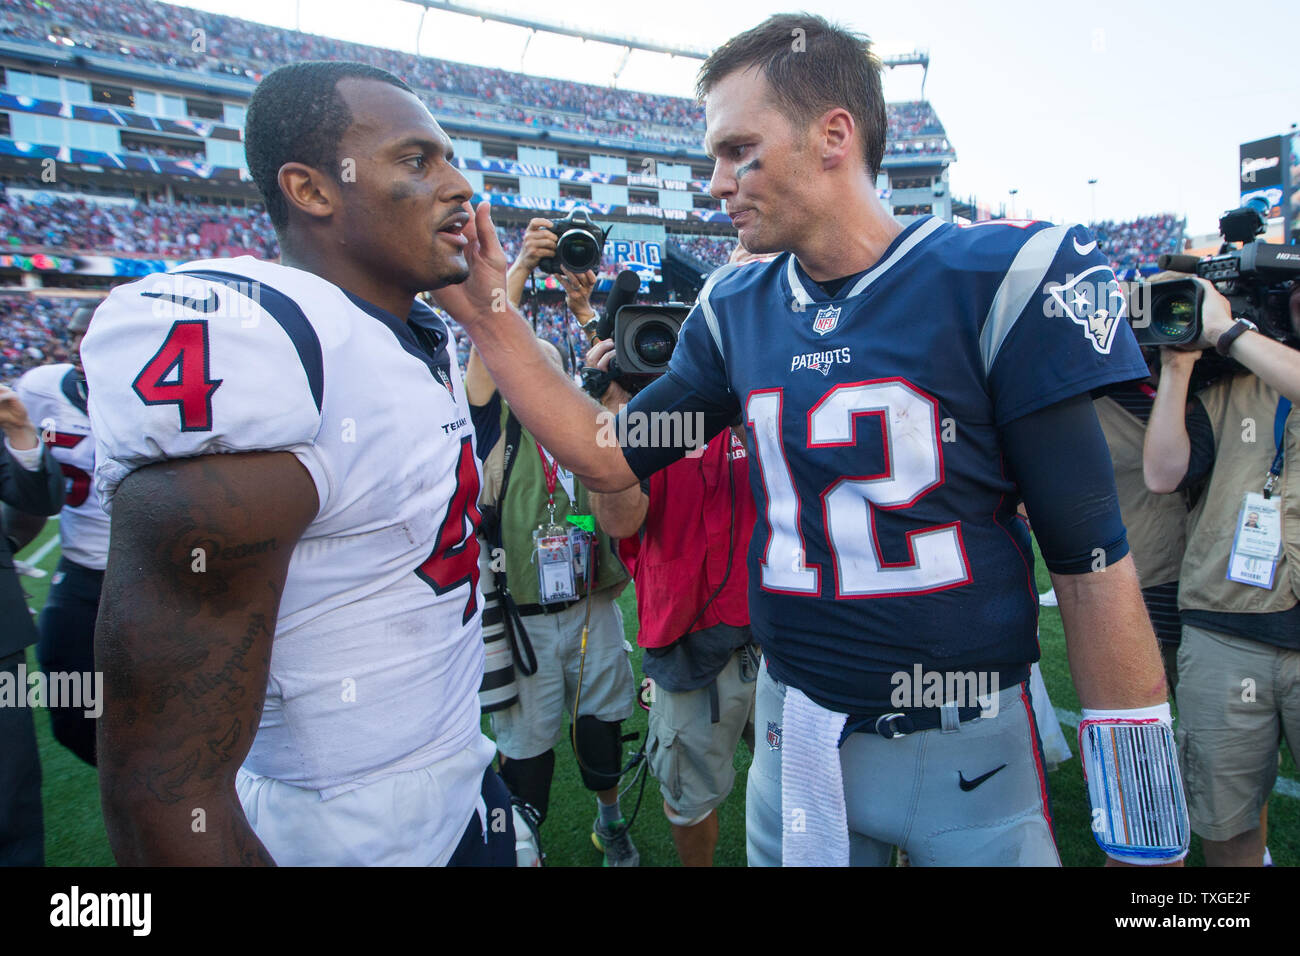 New England Patriots quarterback Tom Brady (12) gives Houston Texans quarterback Deshaun Watson (4) a pat on the cheek after their game at Gillette Stadium in Foxborough, Massachusetts on September 24, 2017. The Patriots defeated the Texans 36-33.   Photo by Matthew Healey/ UPI Stock Photo